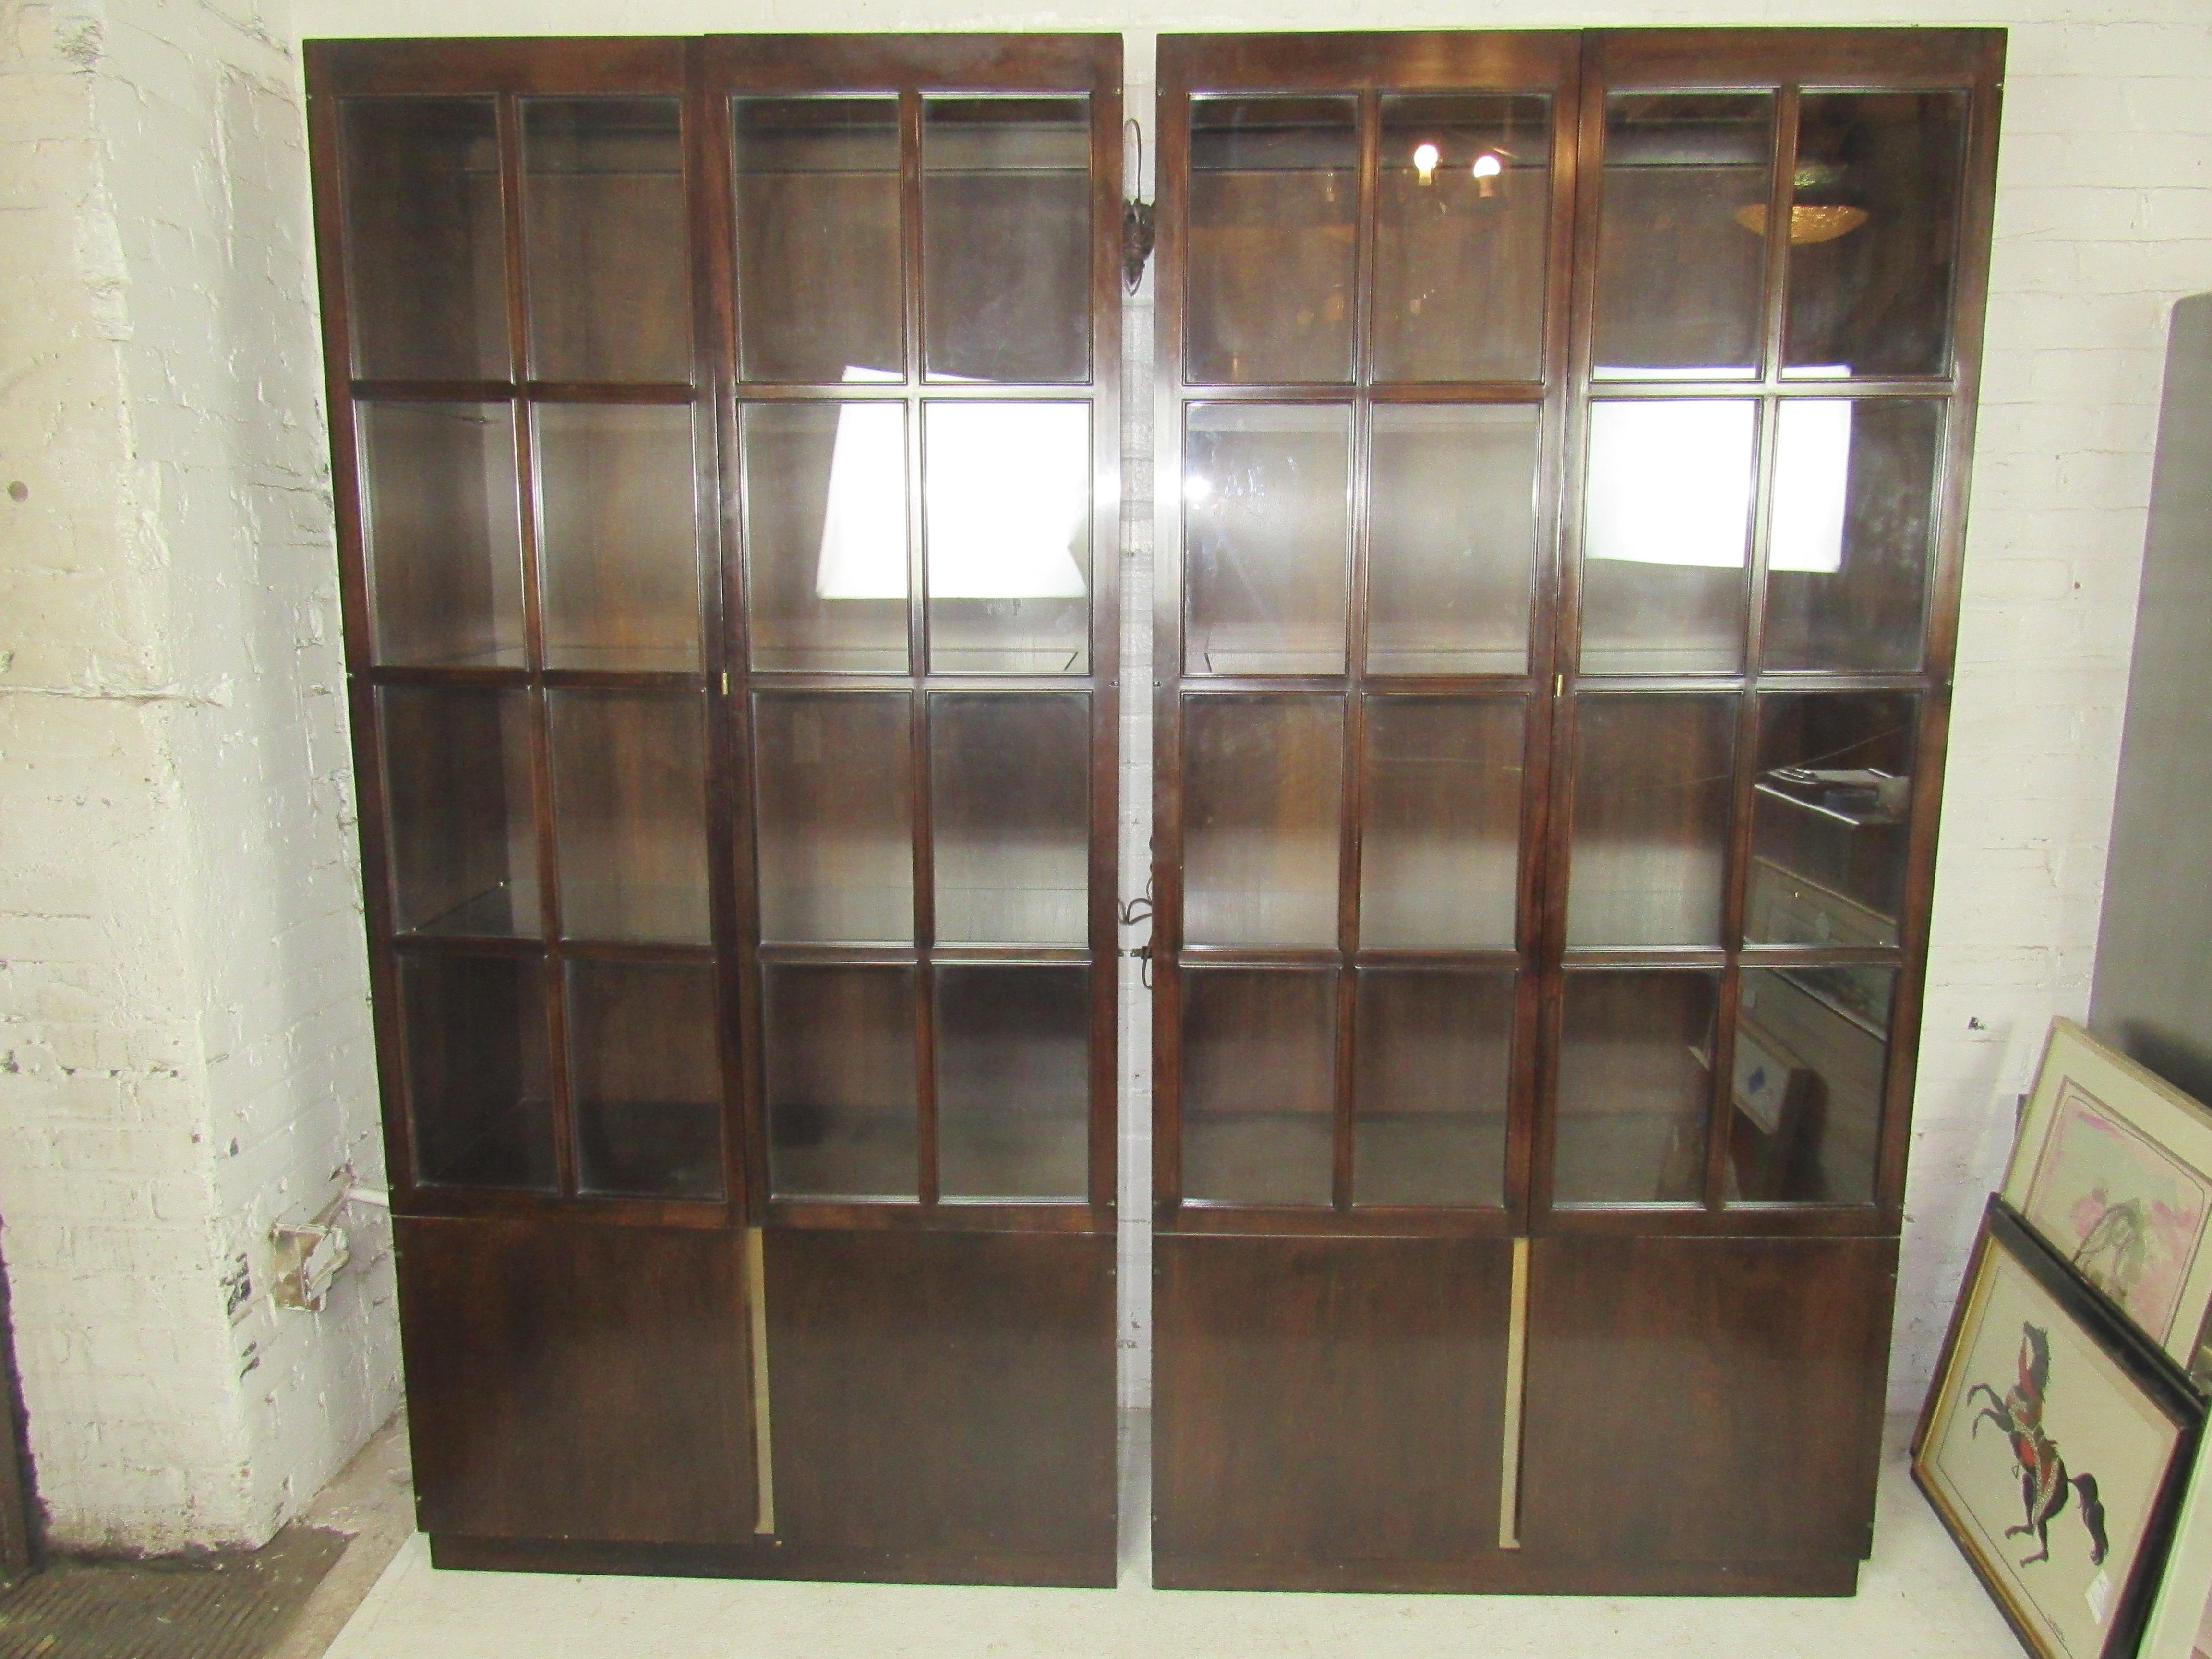 Mid-Century Modern mahogany bookcases with glass front doors and glass shelves. Lighting inside, storage cabinet below.
Price is for single unit.
(Please confirm item location - NY or NJ - with dealer).
  